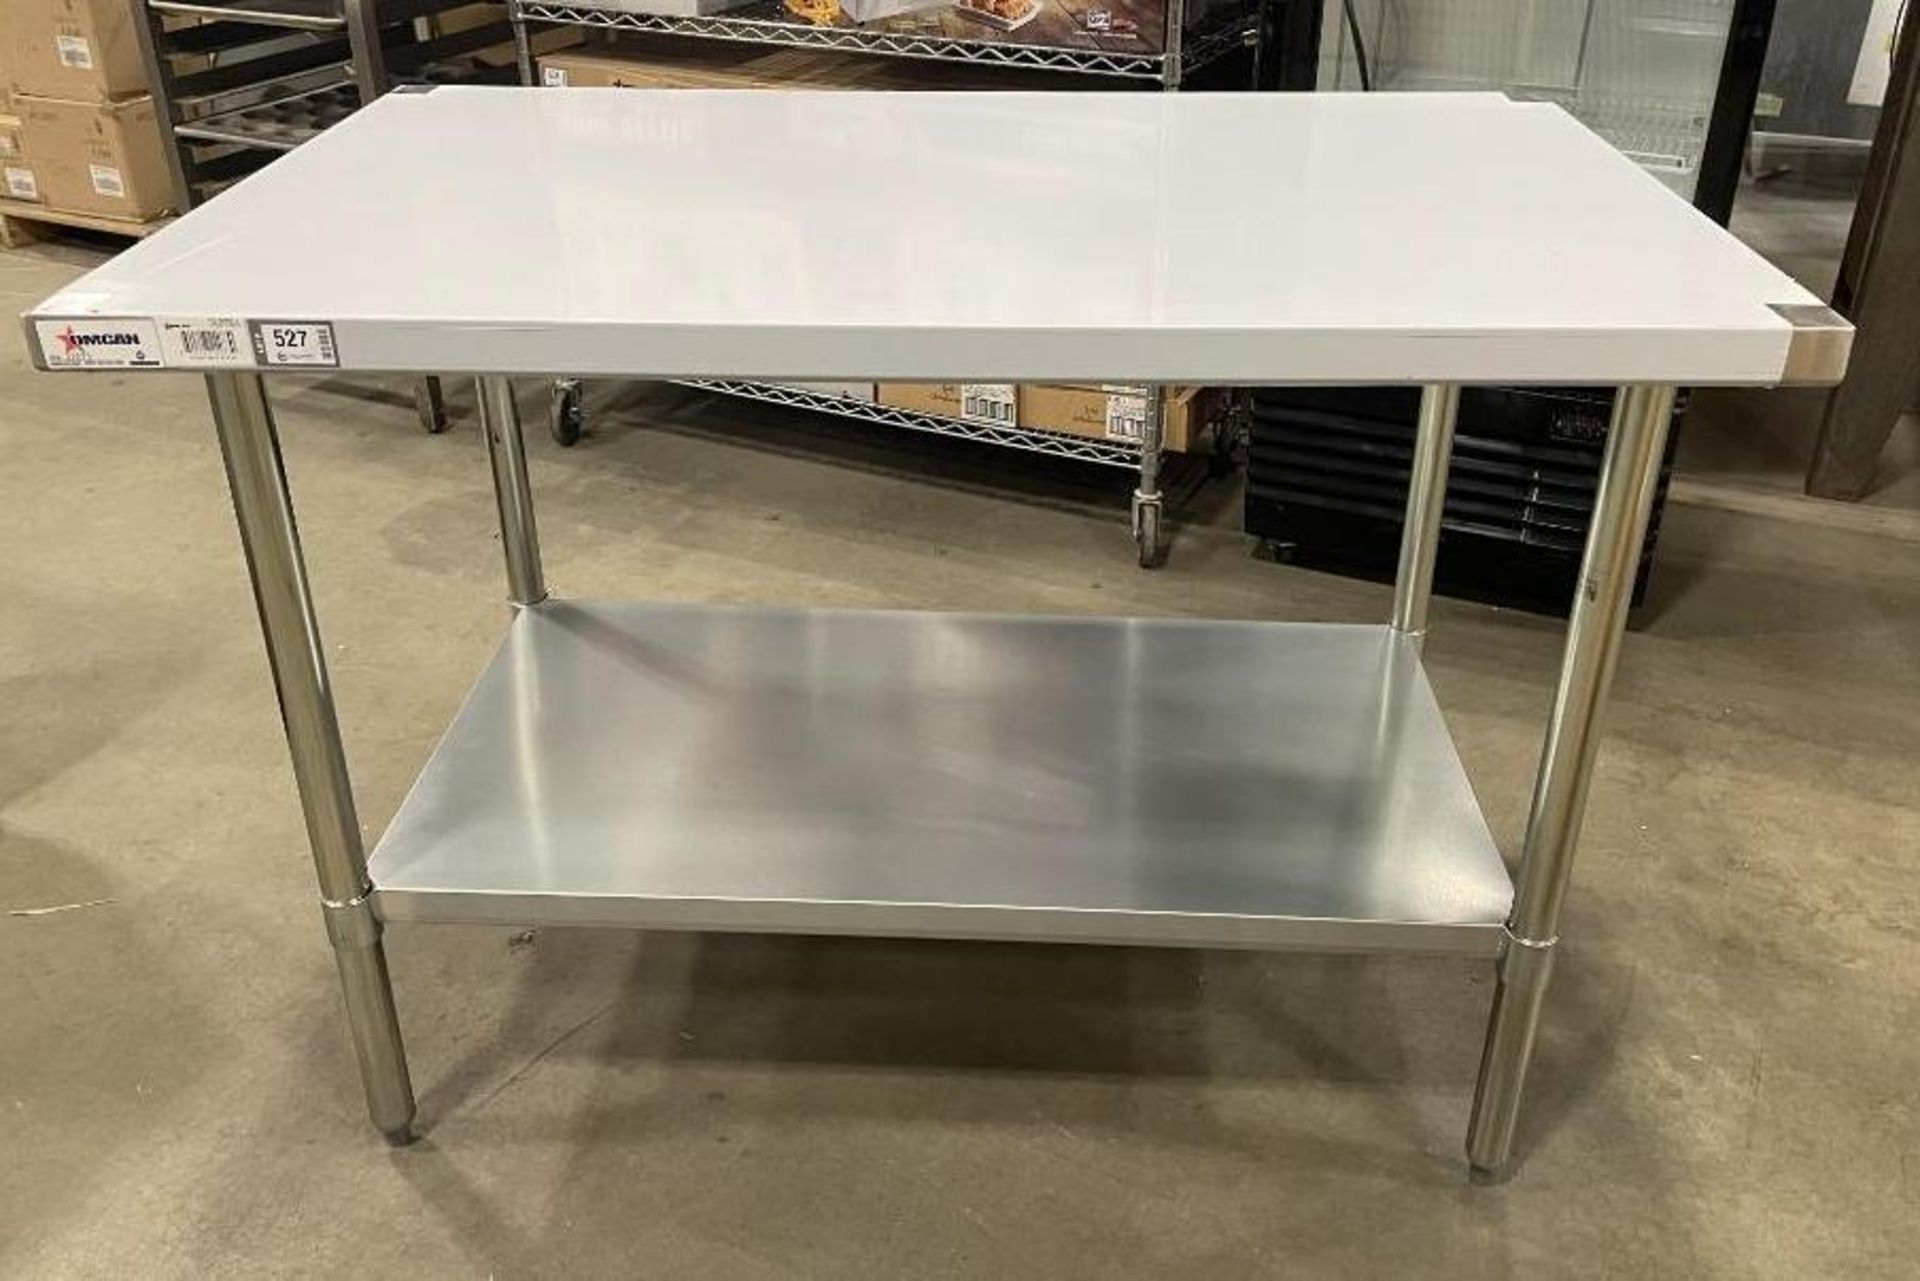 NEW 30" X 48" STAINLESS STEEL WORK TABLE, OMCAN 22073